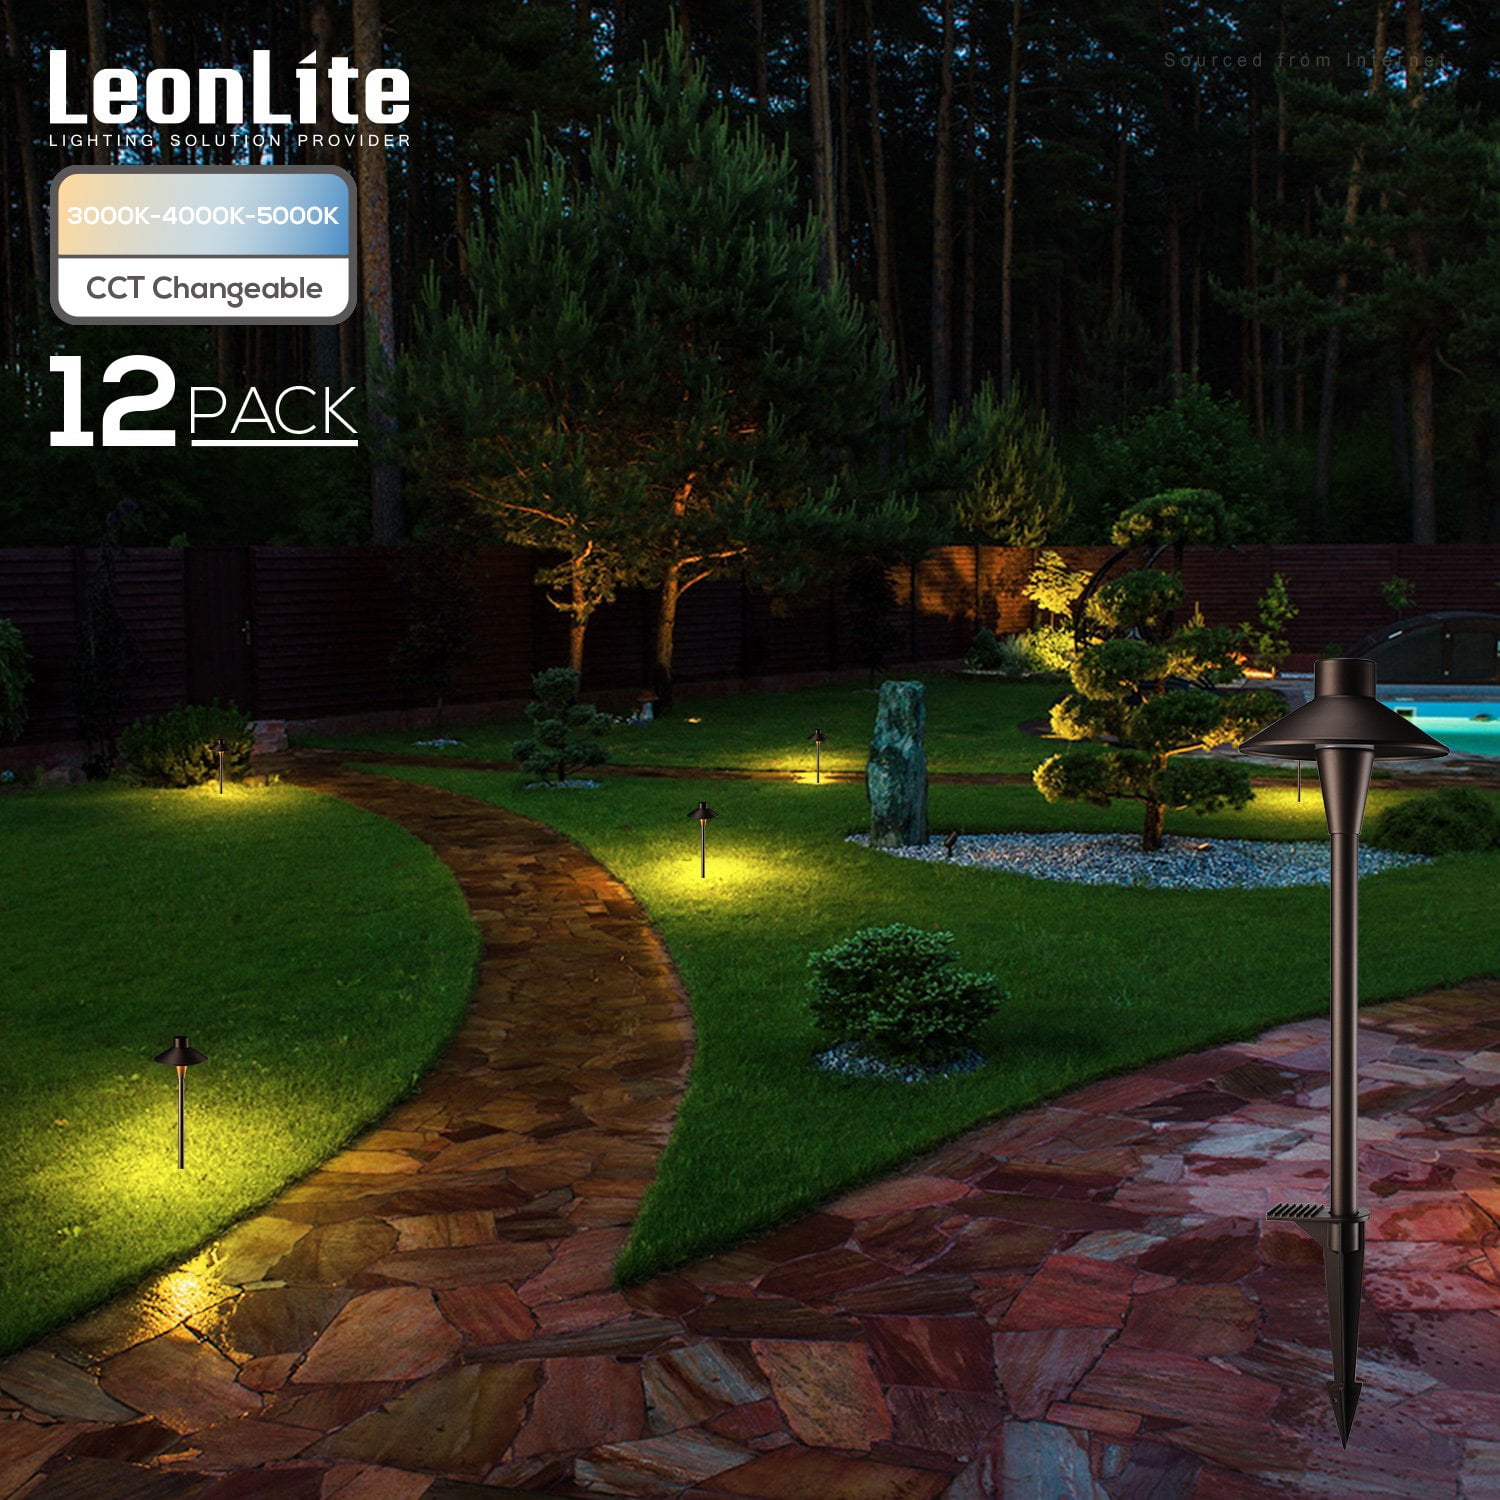 LEONLITE 12 Pack 3CCT LED Landscape Lights, 12V Low Voltage Aluminum  Pathway Lights, Warm White/Cool White/Daylight Selectable, UL Listed Cord 